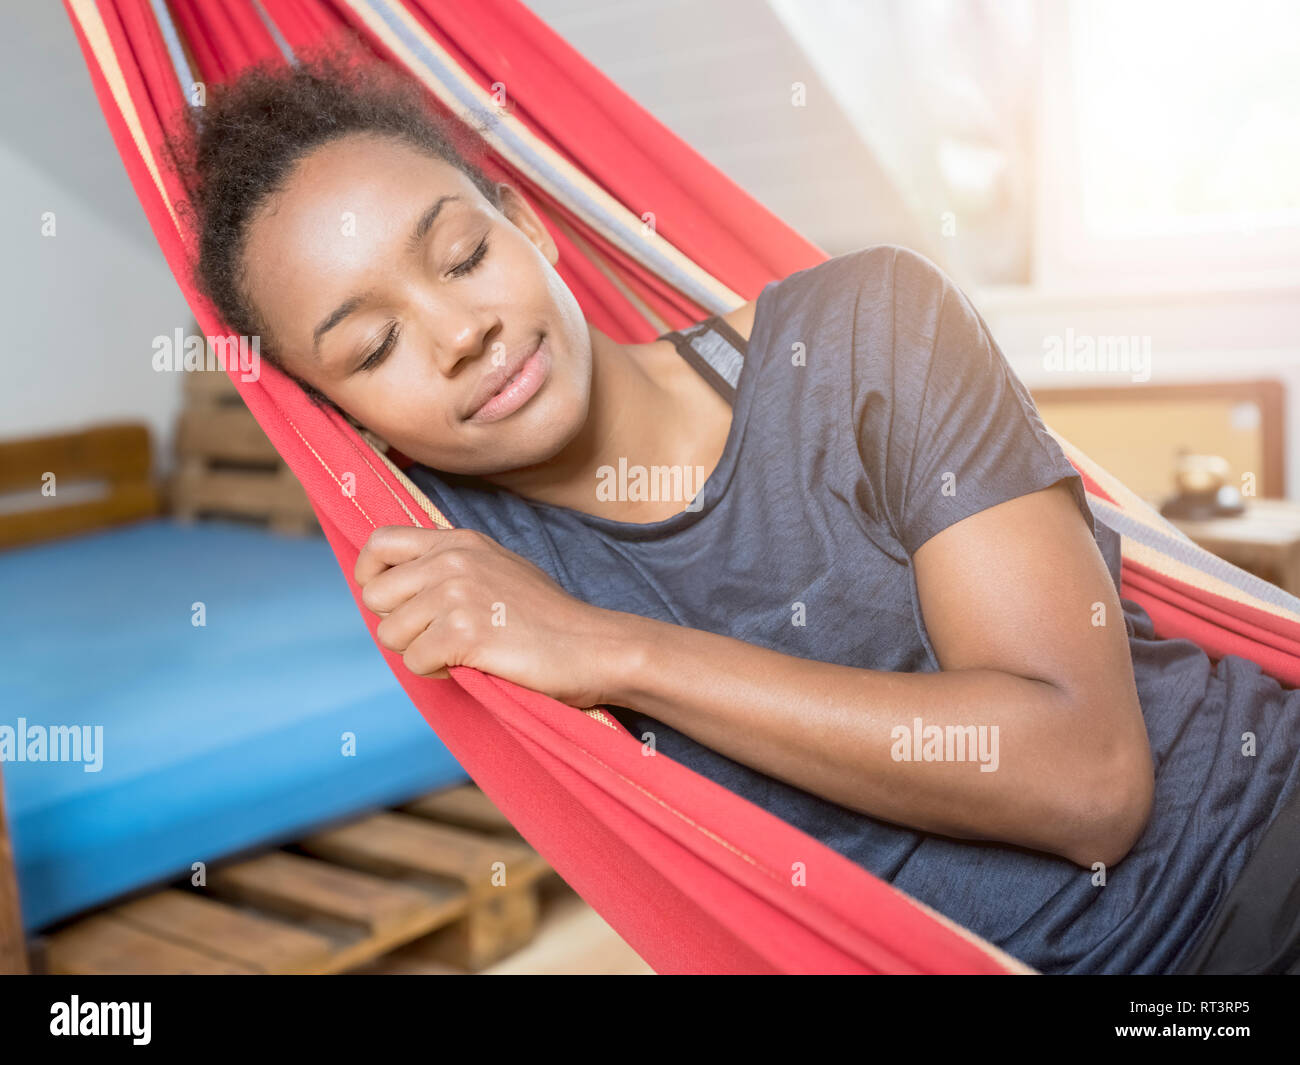 Smiling young woman sleeping in hammock Stock Photo